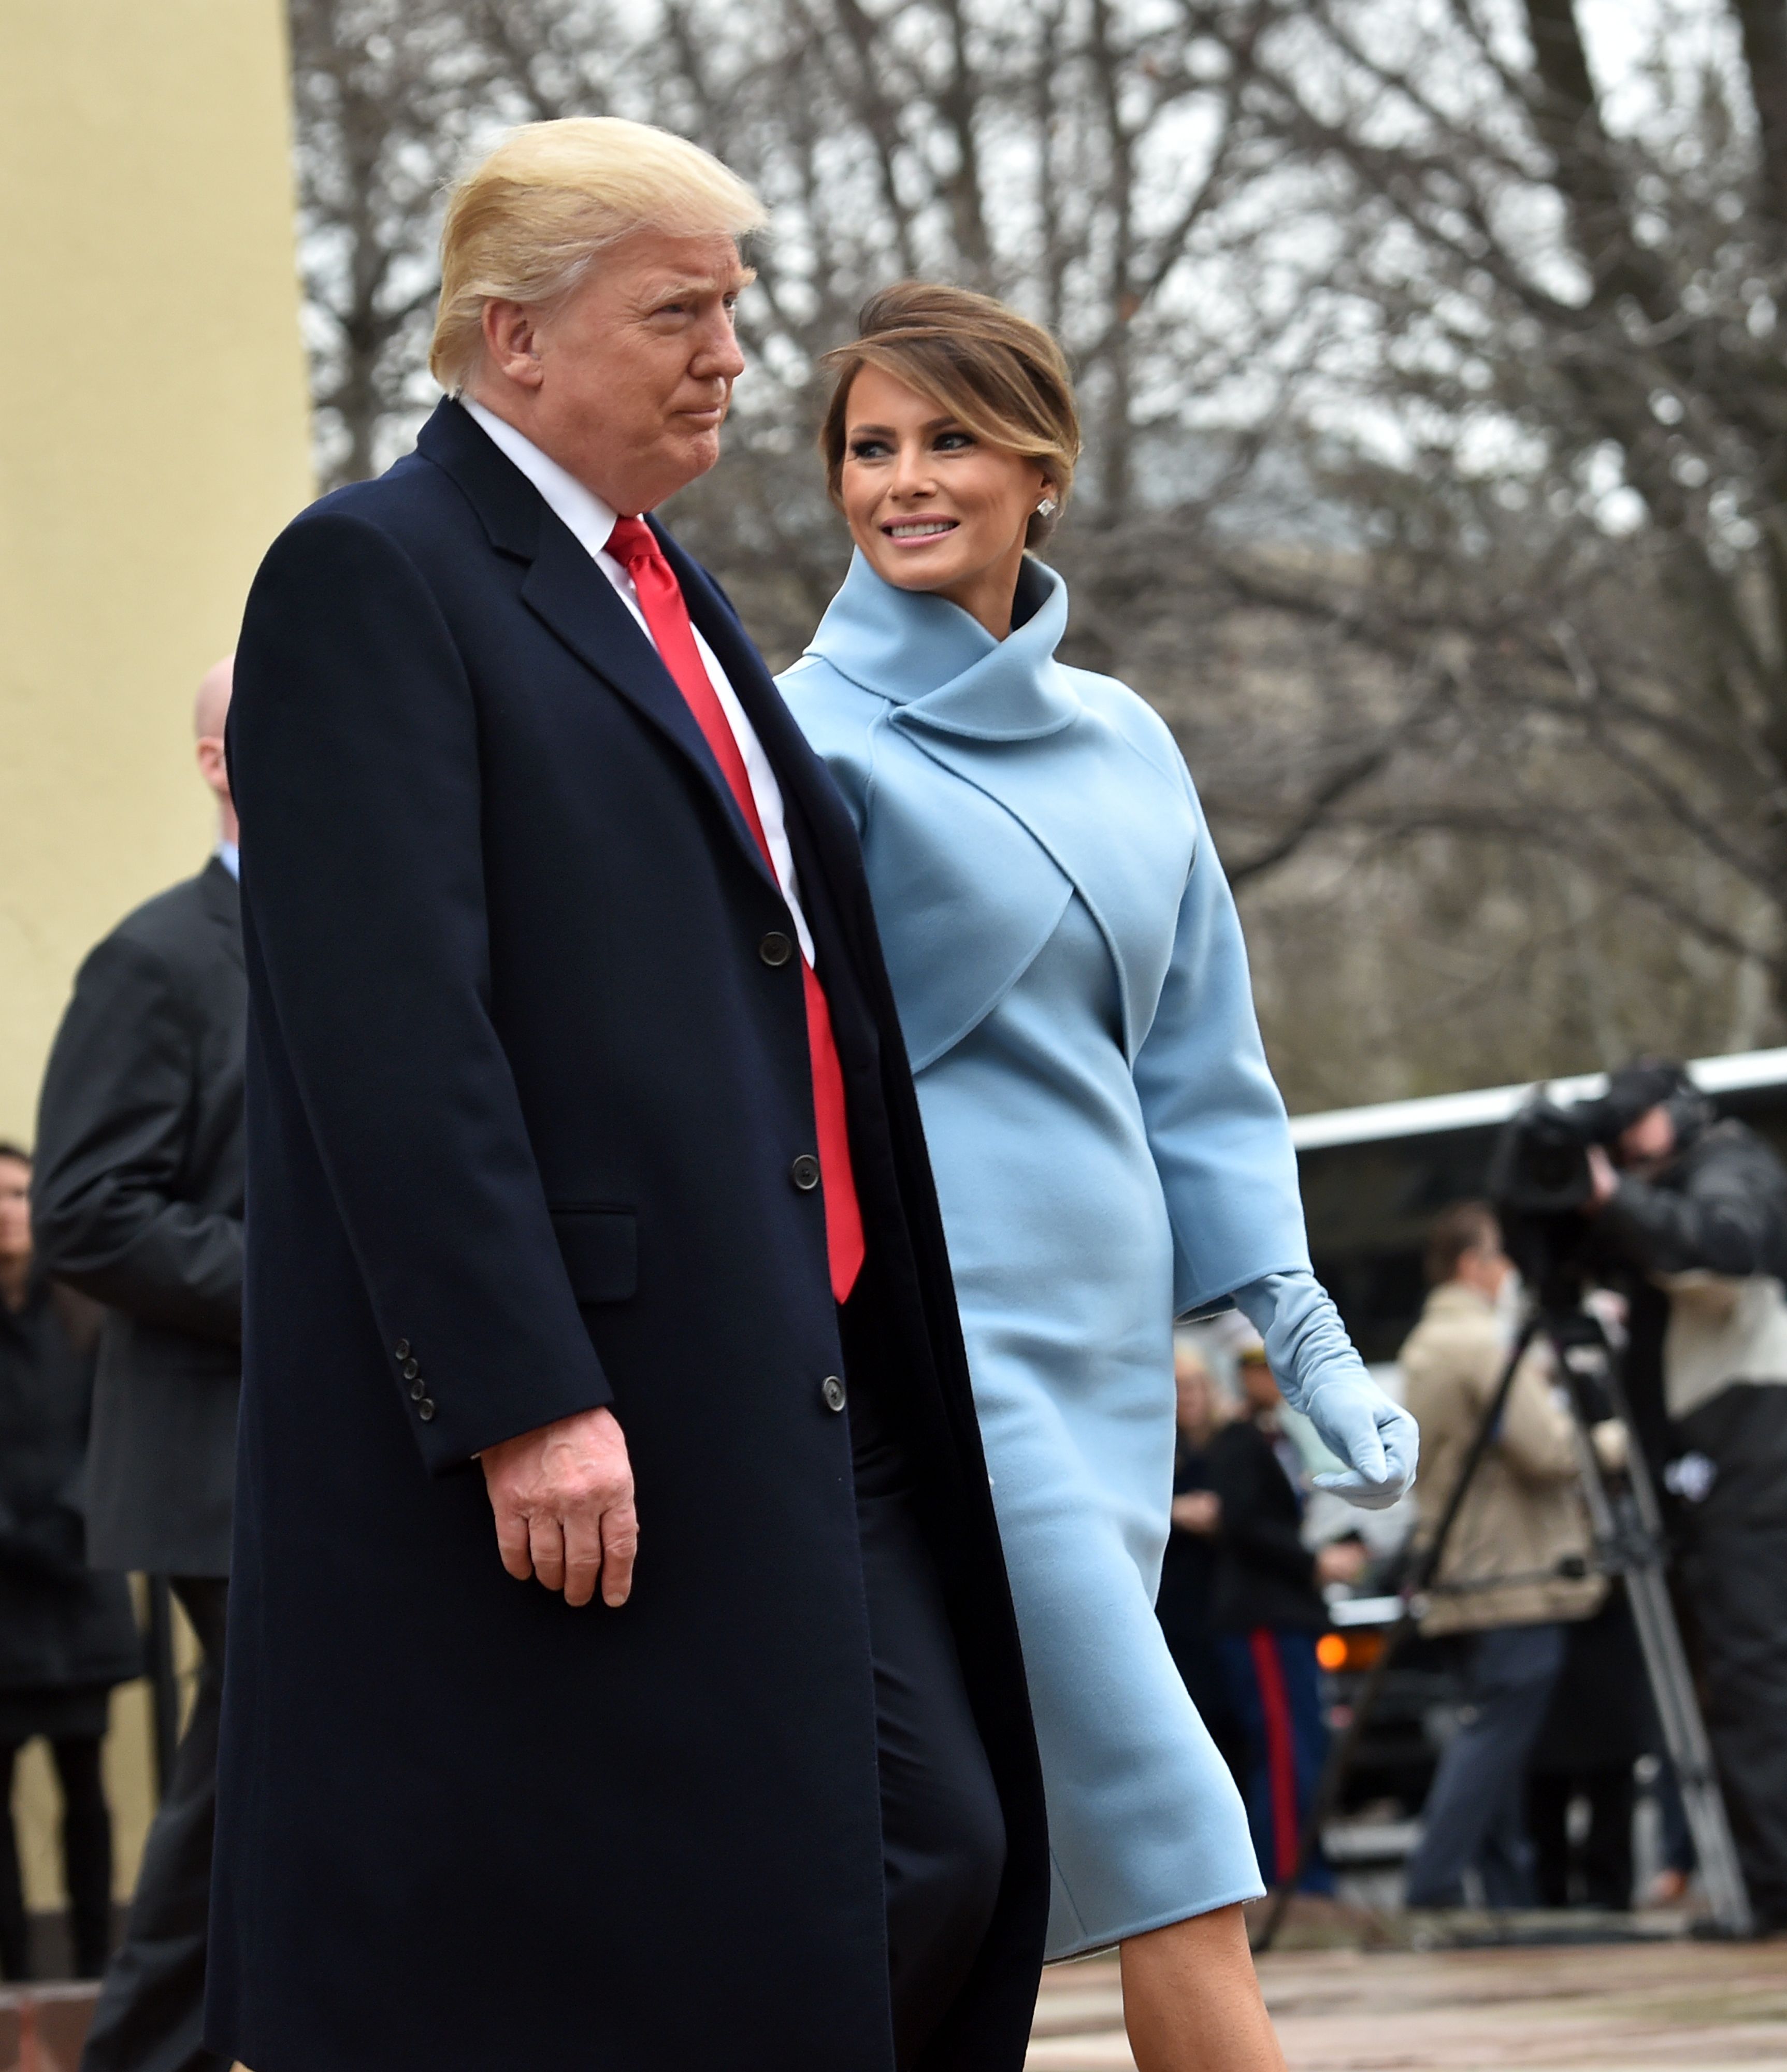 US President-elect Donald Trump and his wife Melania leave St. John's Episcopal Church on January 20, 2017, before Trump's inauguration. / AFP / Nicholas Kamm        (Photo credit should read NICHOLAS KAMM/AFP/Getty Images) (NICHOLAS KAMM—AFP/Getty Images)